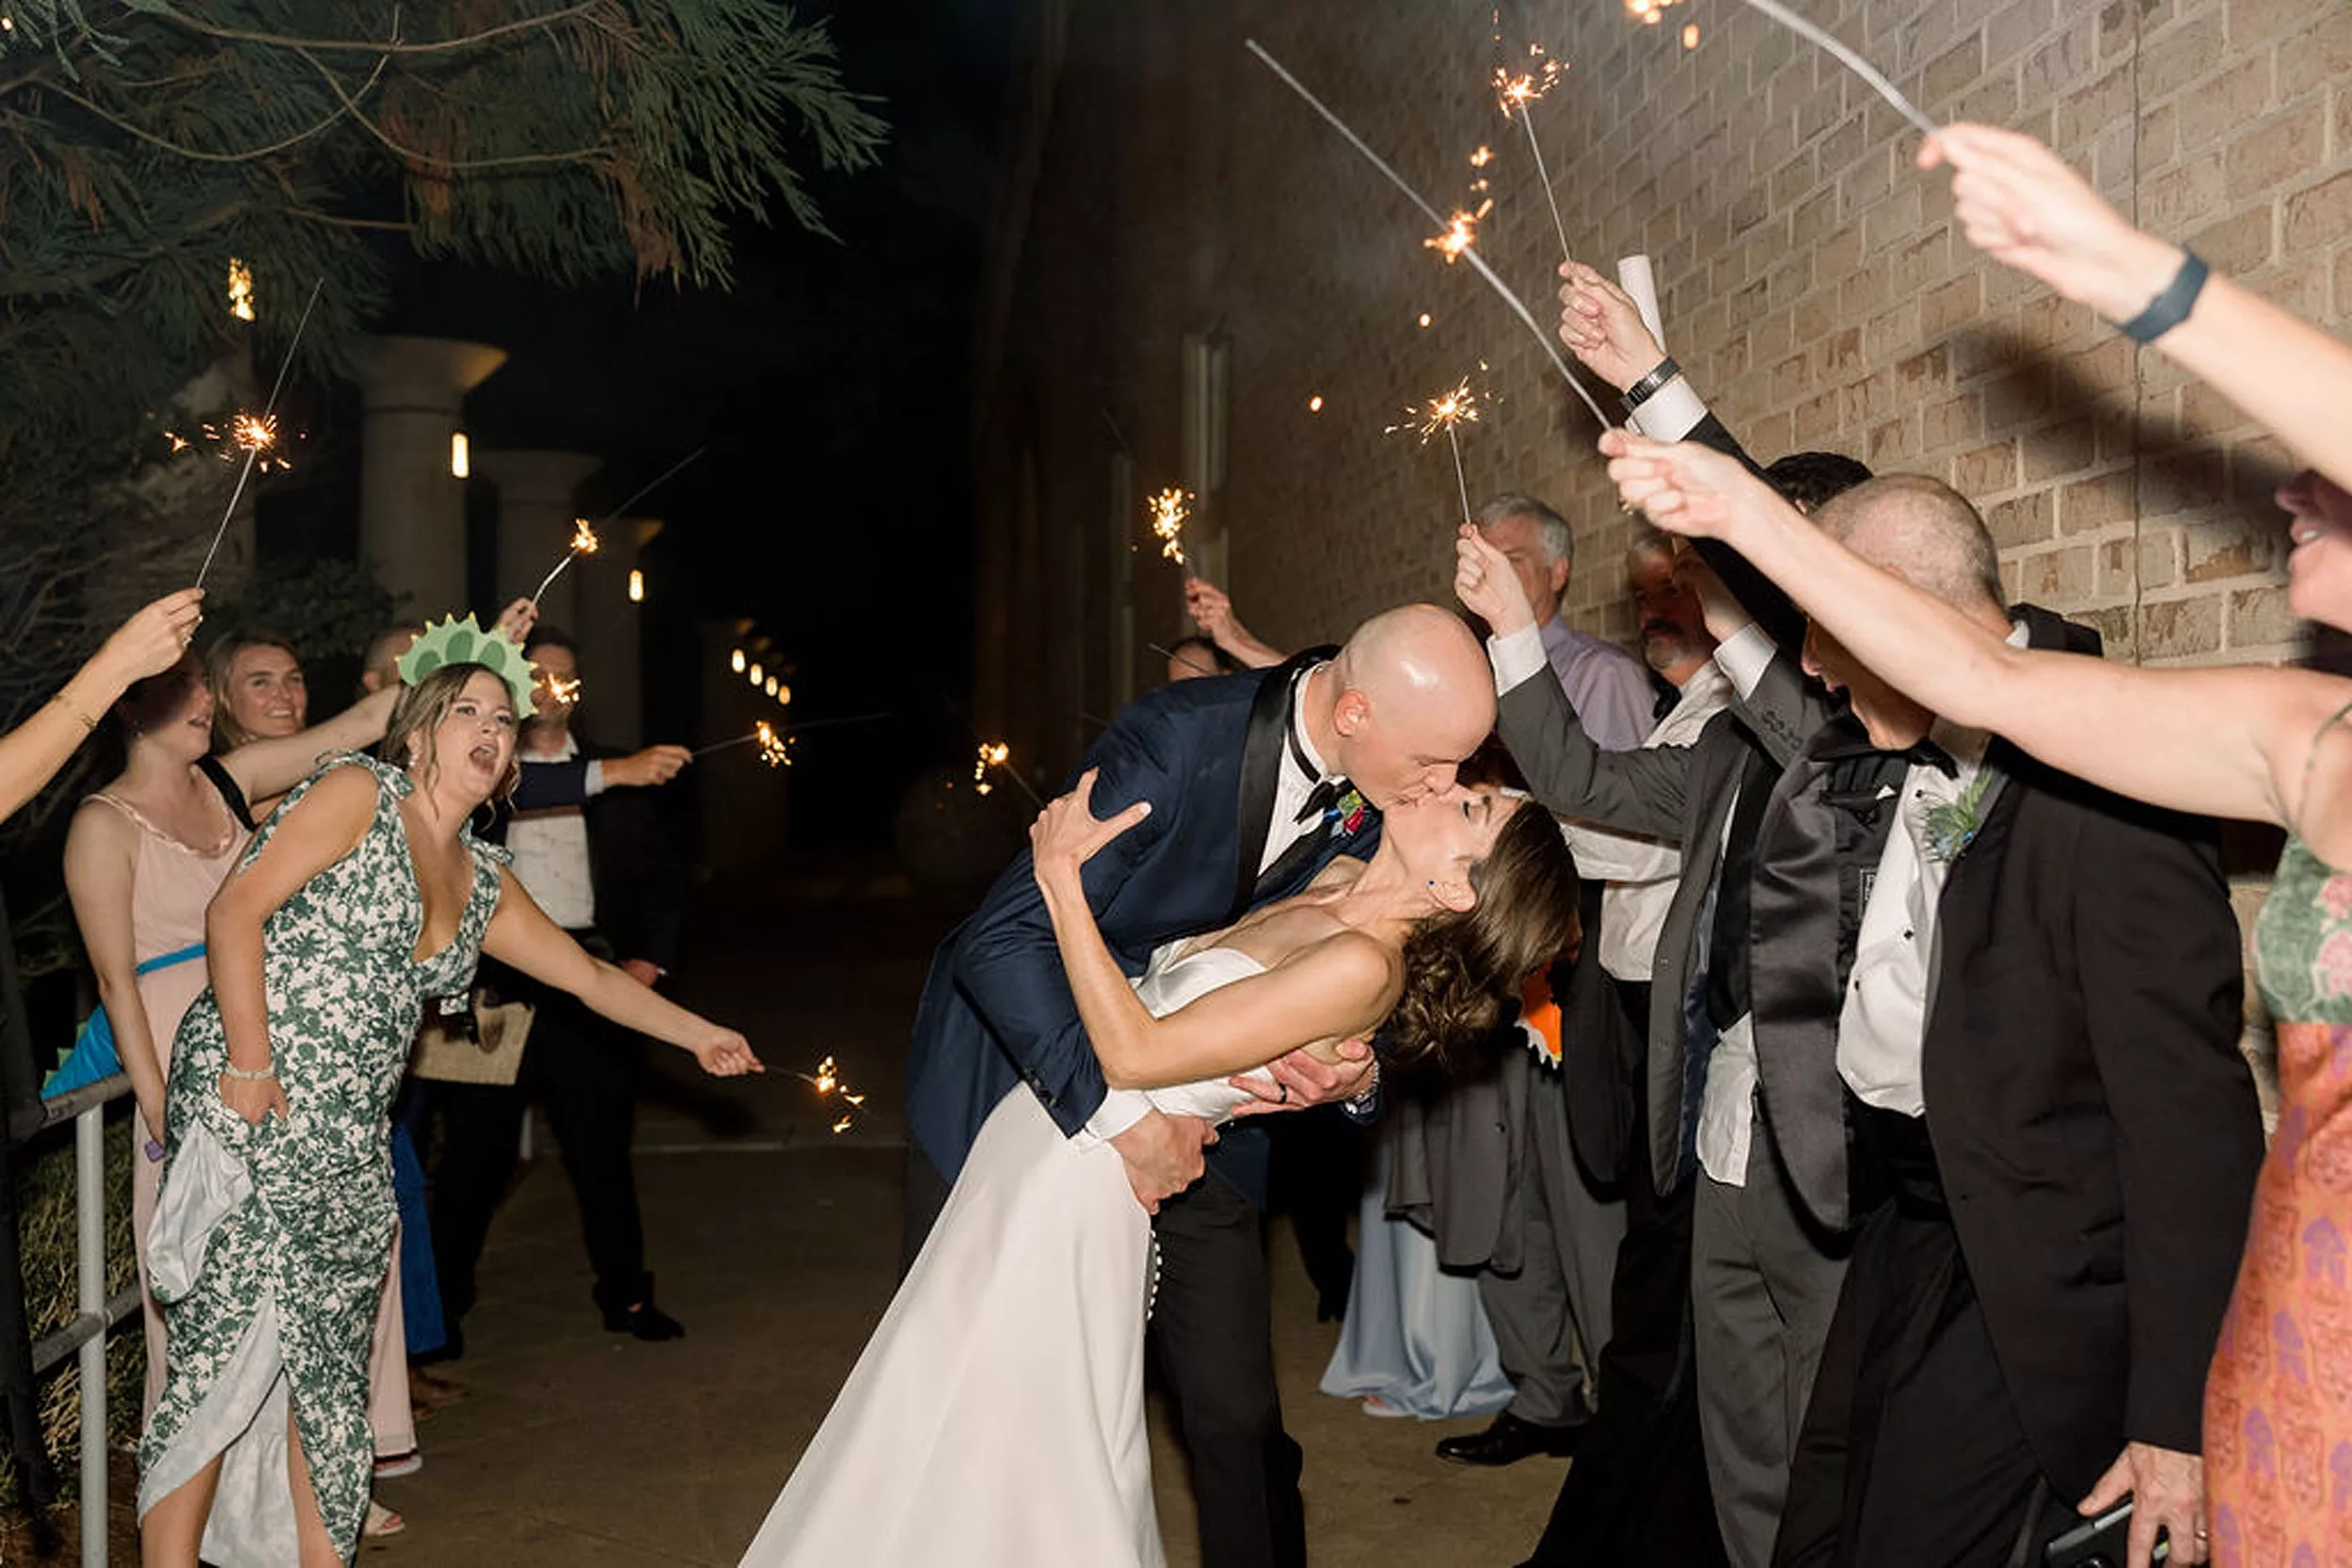 A bride and groom kiss and dip under a shower of sparklers being held by their guests